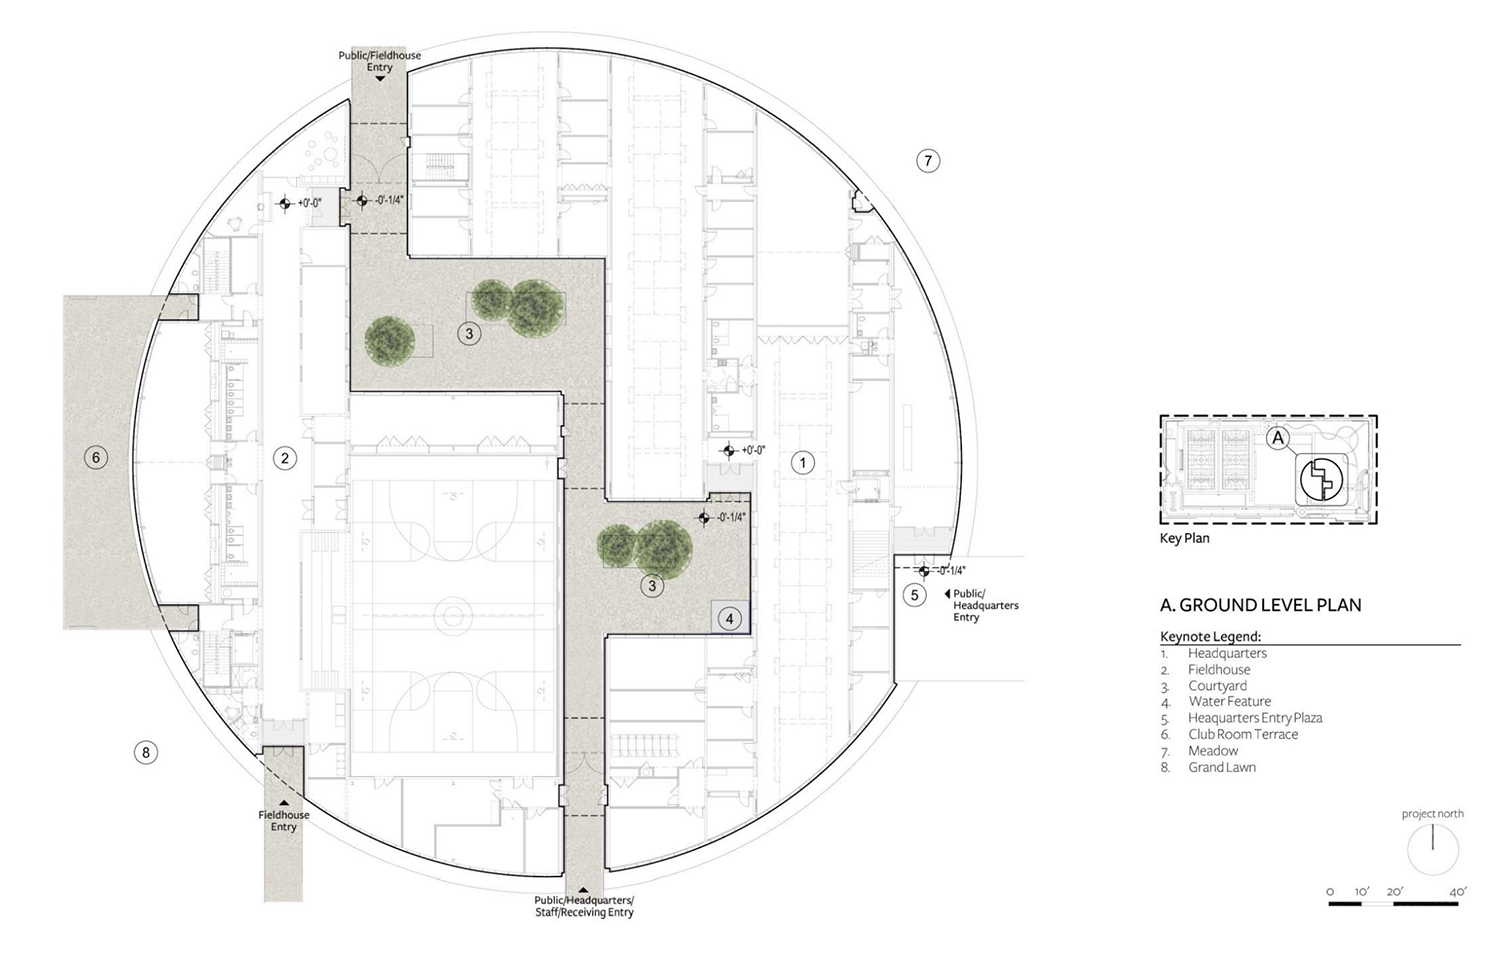 Ground Floor Plan for Chicago Park District Headquarters. Drawing by John Ronan Architects